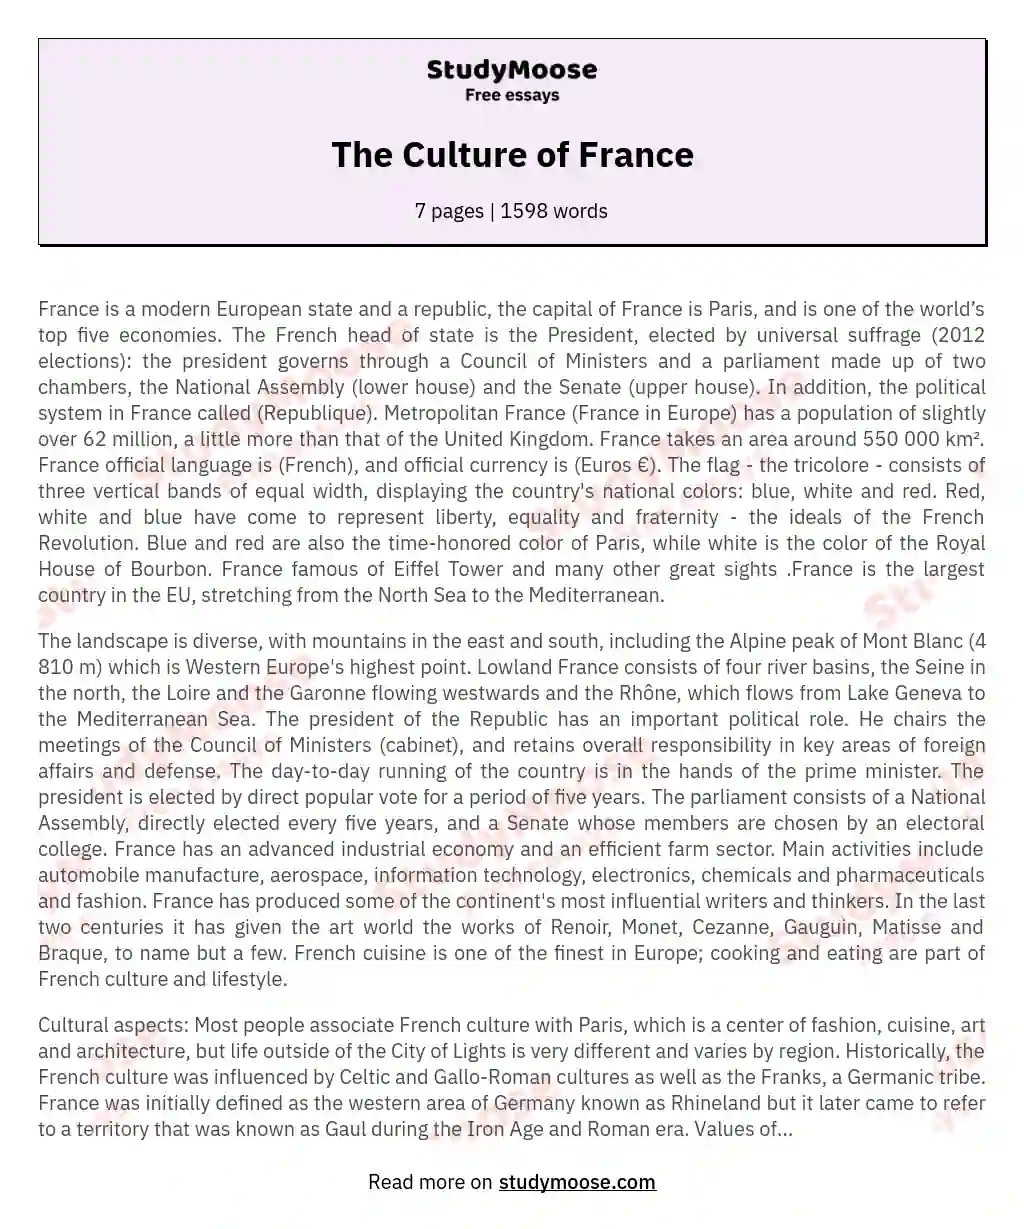 The Culture of France essay